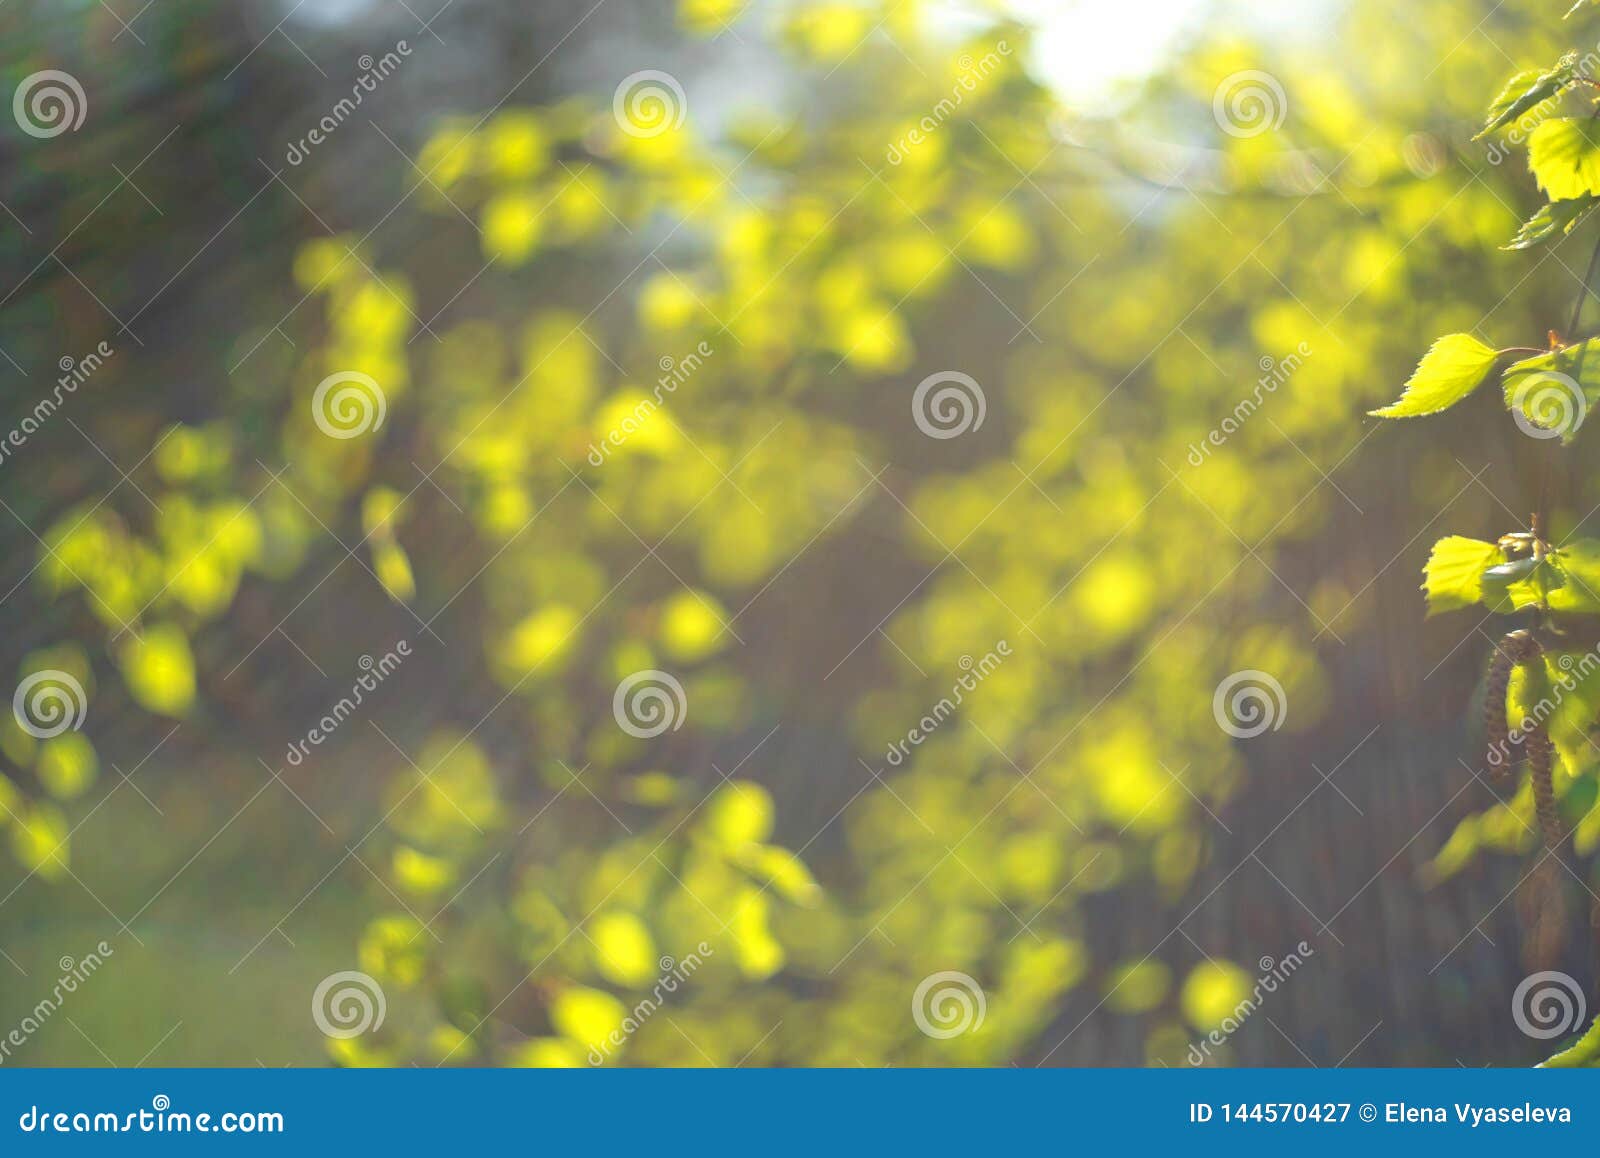 spring green lrainbow the sun& x27;s rays on a blurred background of fresh green foliage. springtime nature concept